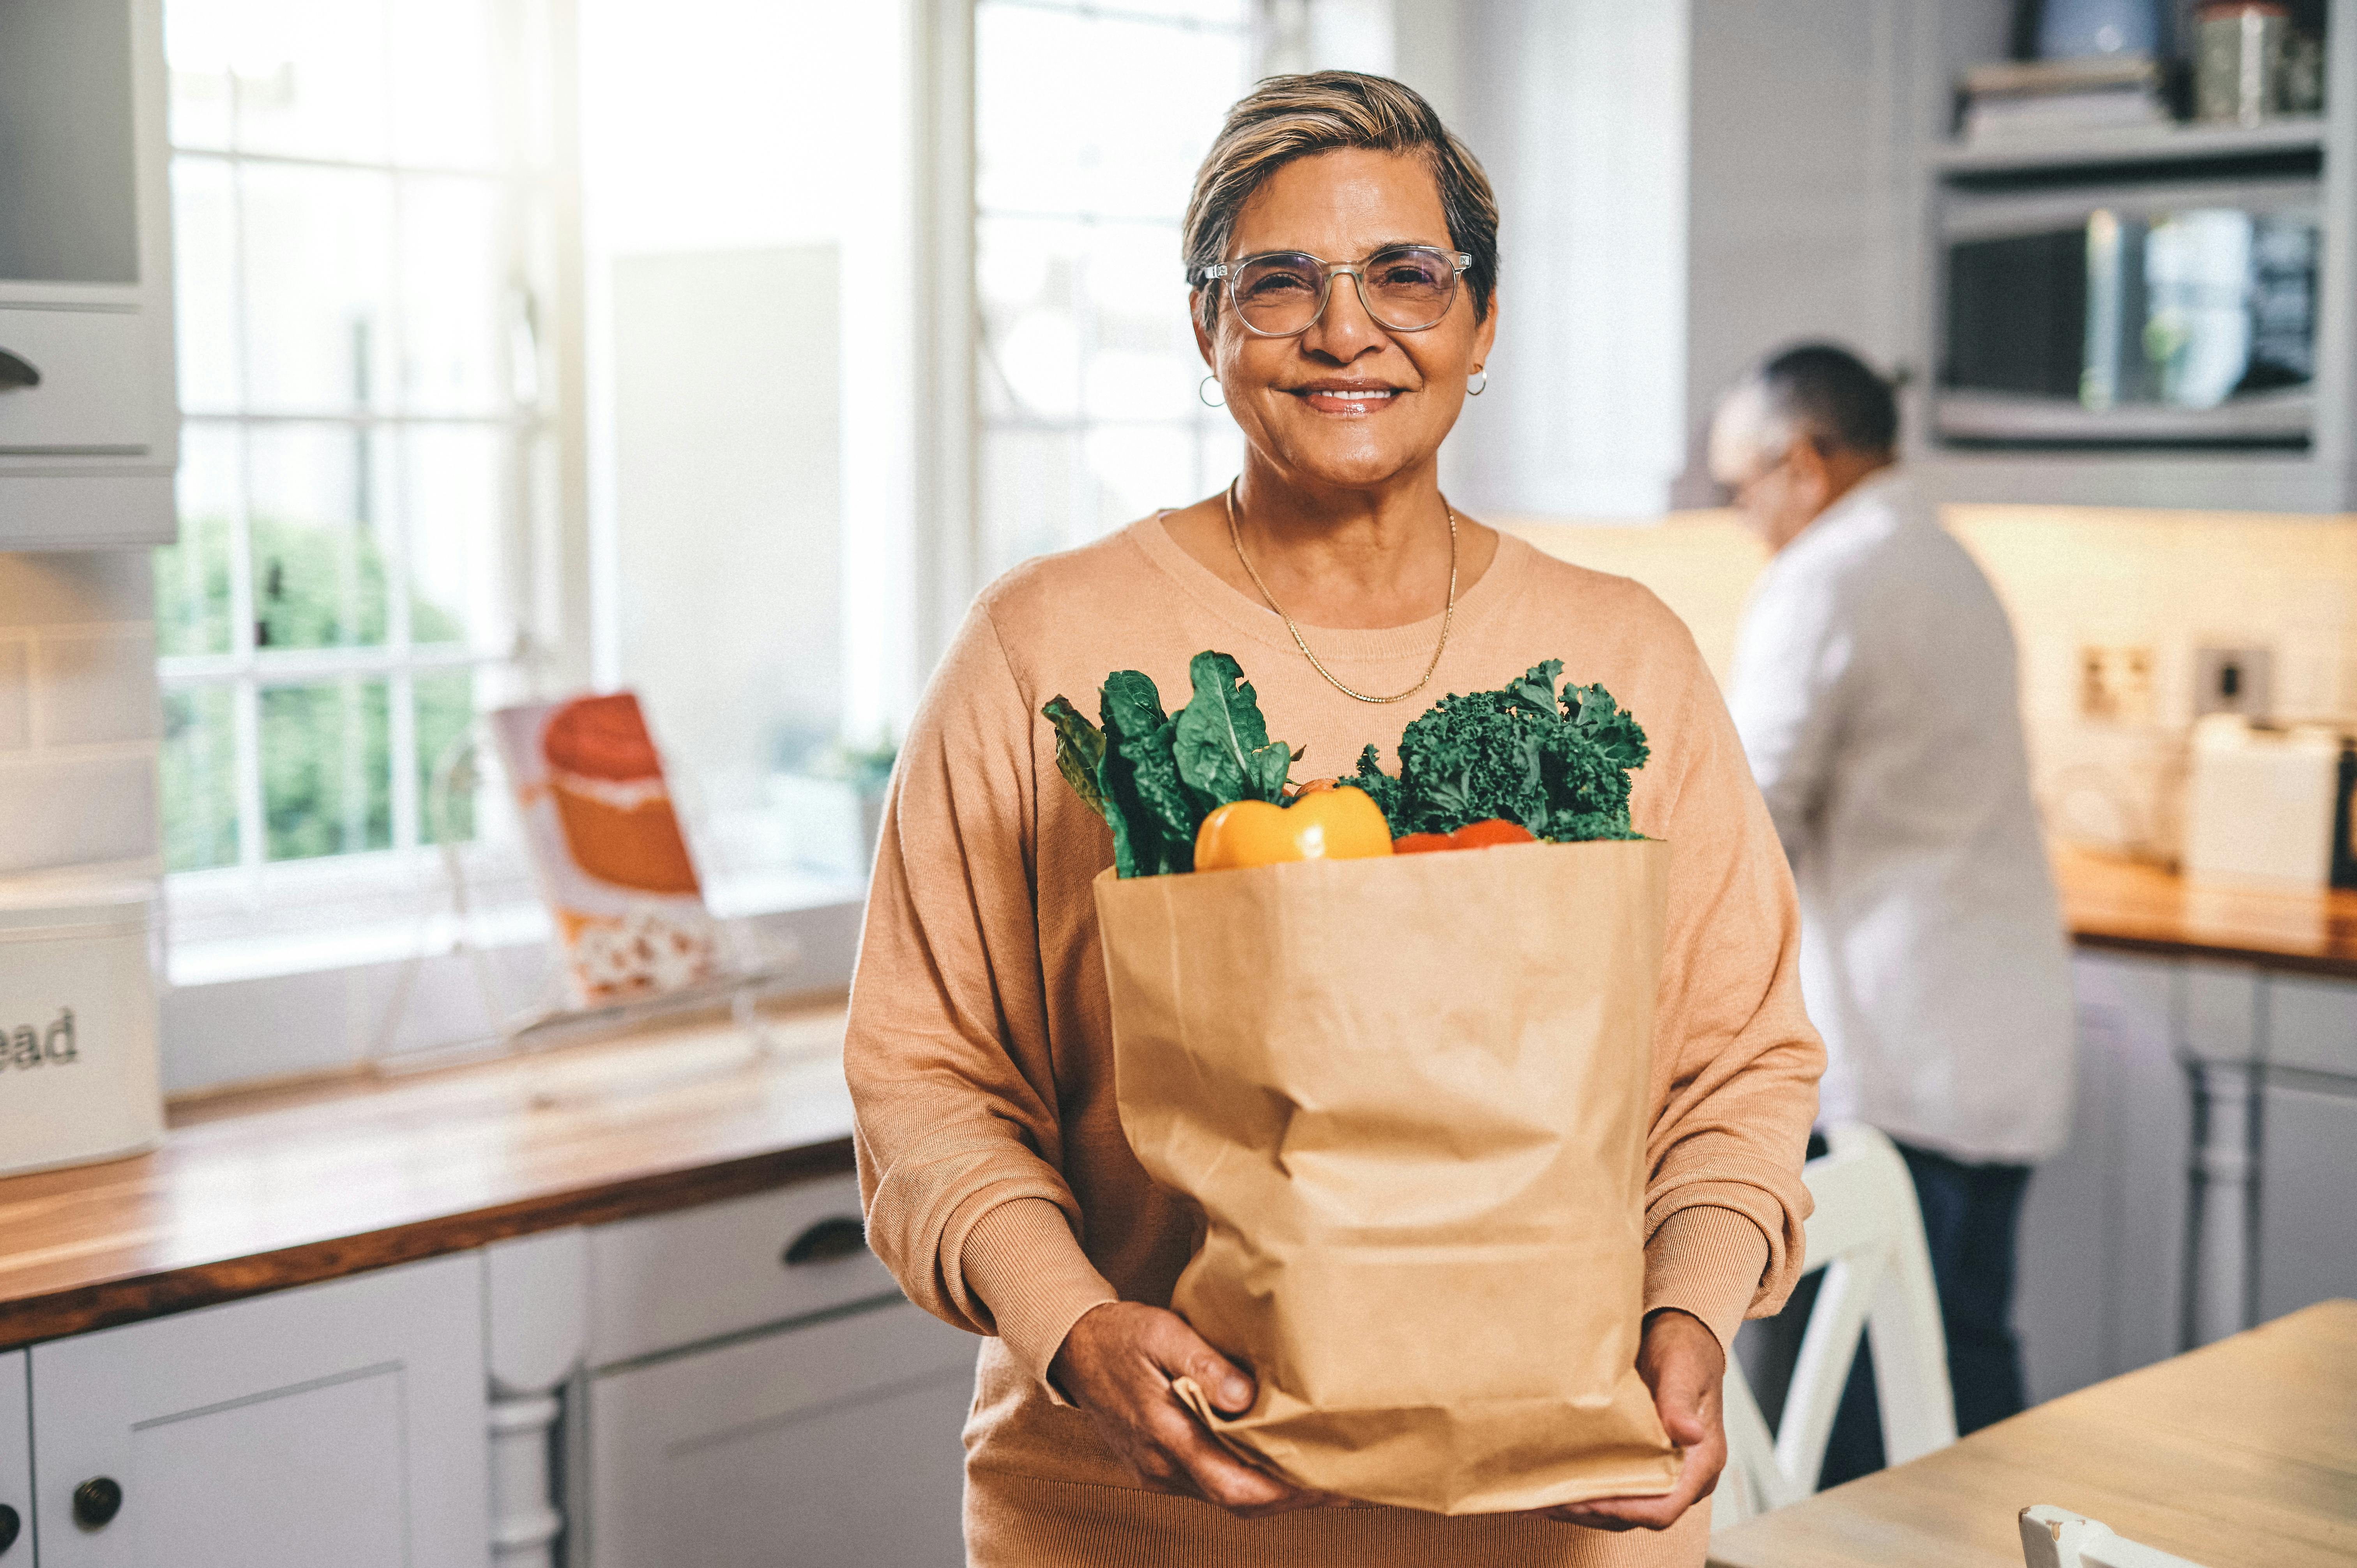 Shot of a elderly woman holding a grocery bag in the kitchen